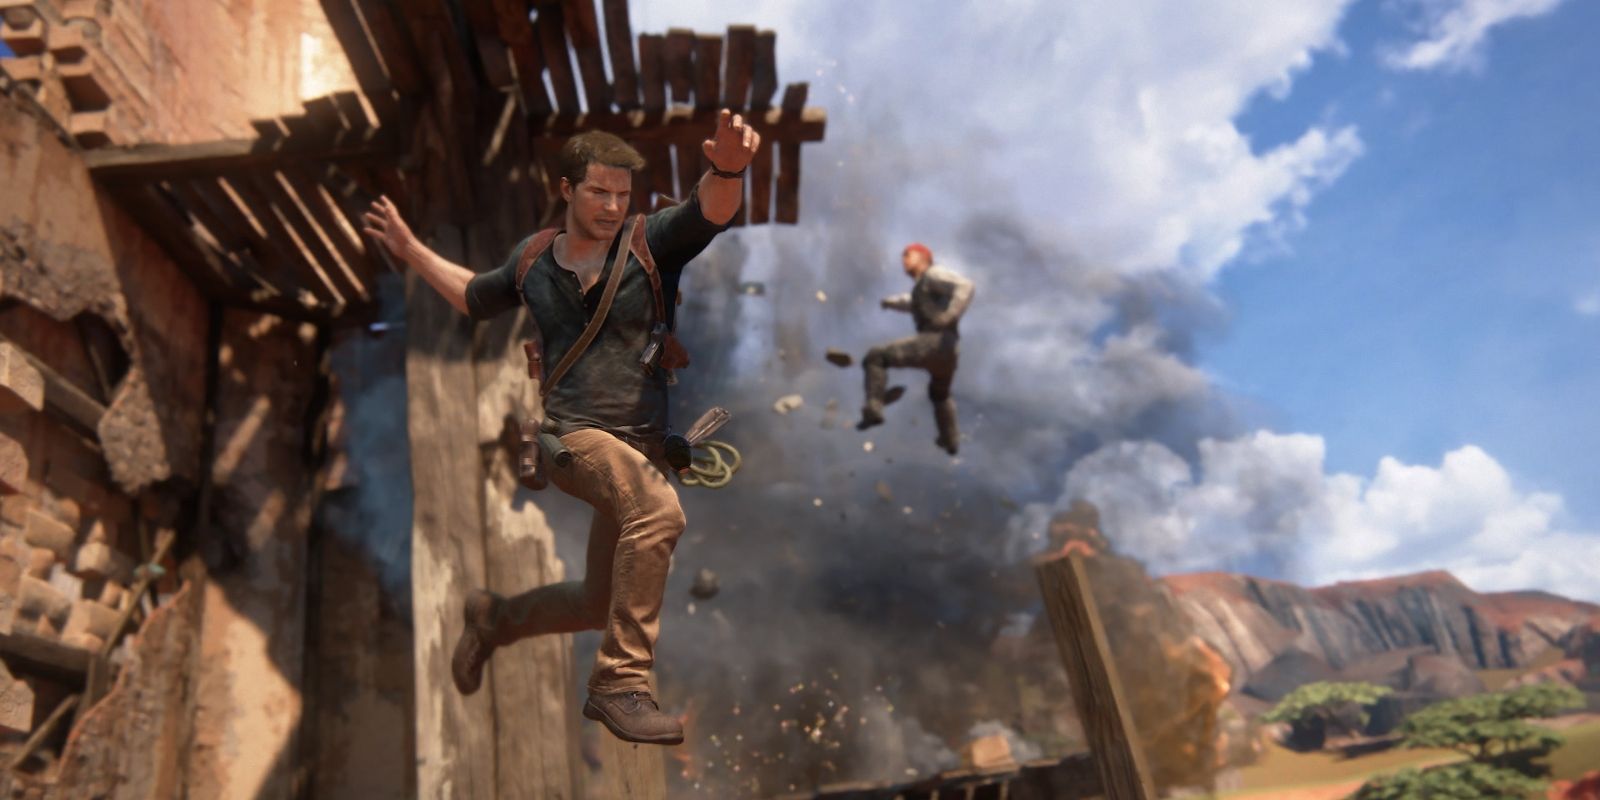 Nathan Drake jumping off a building in Uncharted 4